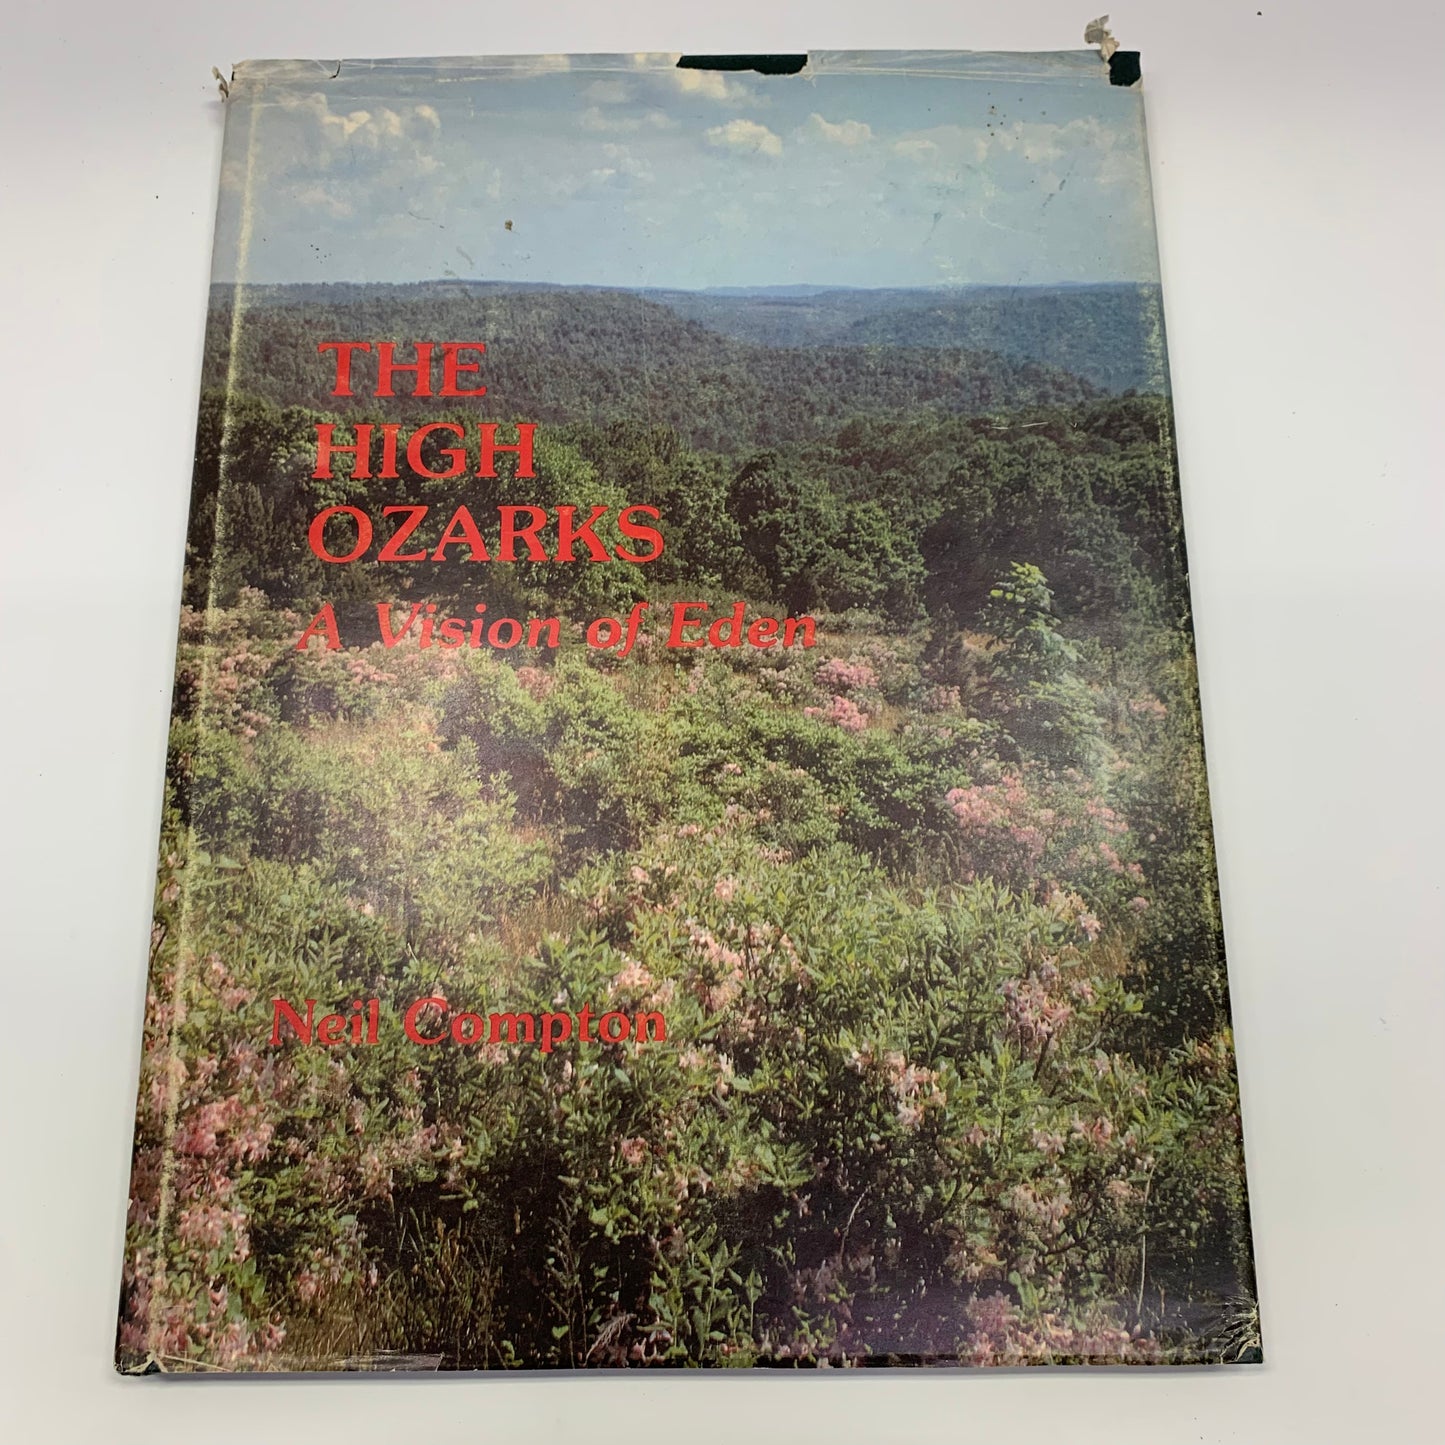 The High Ozarks: A Vision of Eden - Neil Compton - 1982